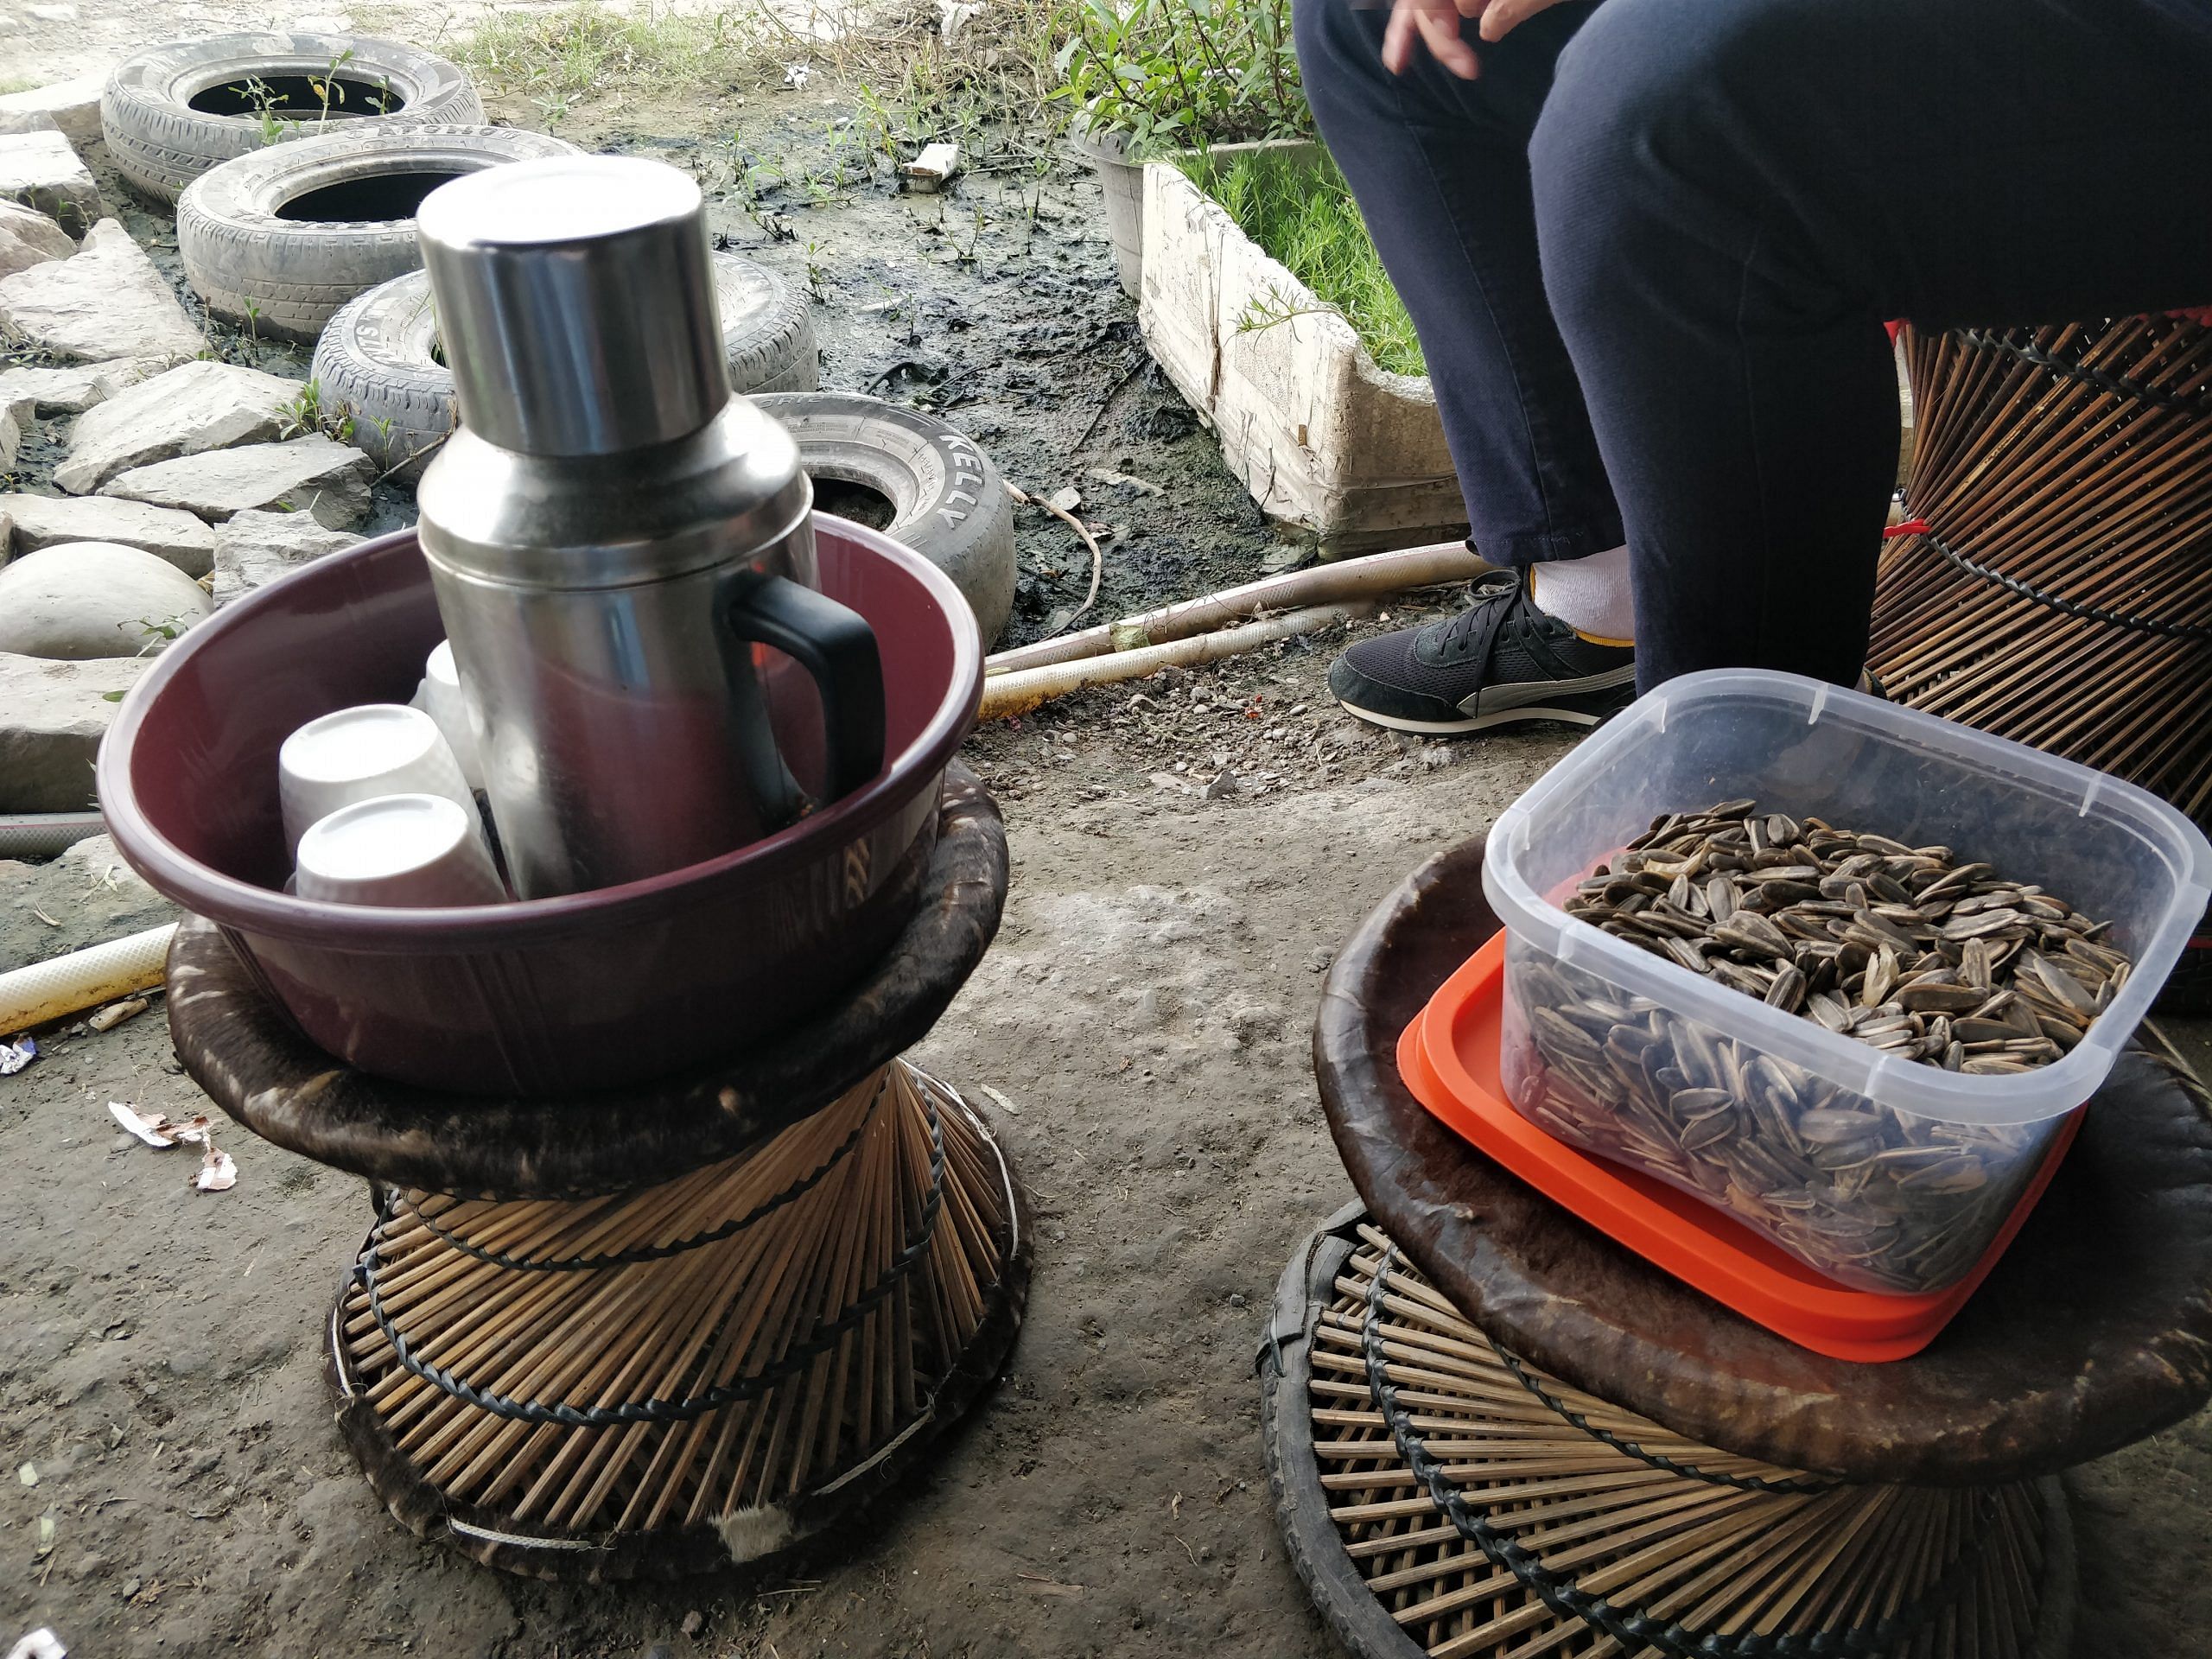 Myanmarese customary tea and sunflower seeds are served at a home of a Myanmar refugee in Churachandpur. | Photo Credit: Sonal Matharu